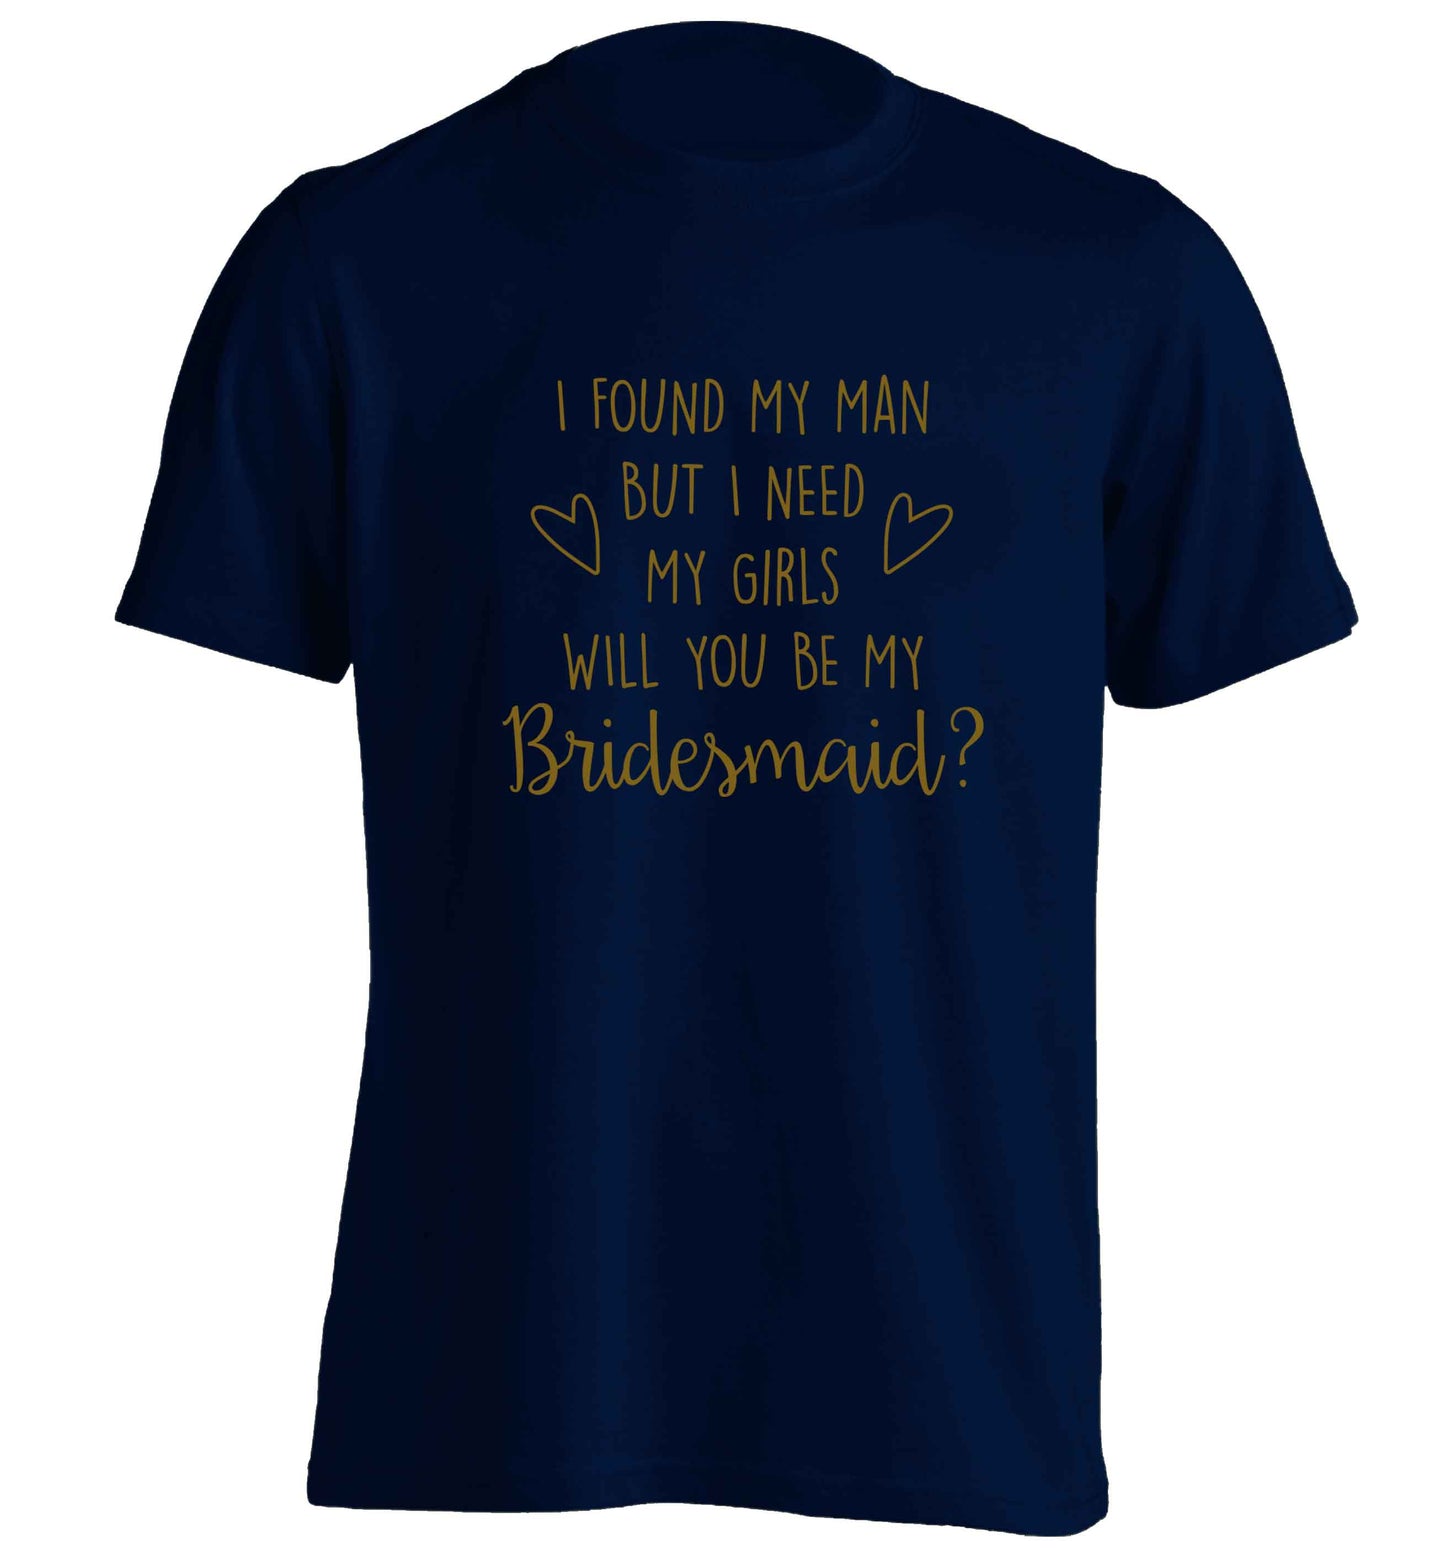 I found my man but I need my girls will you be my bridesmaid? adults unisex navy Tshirt 2XL